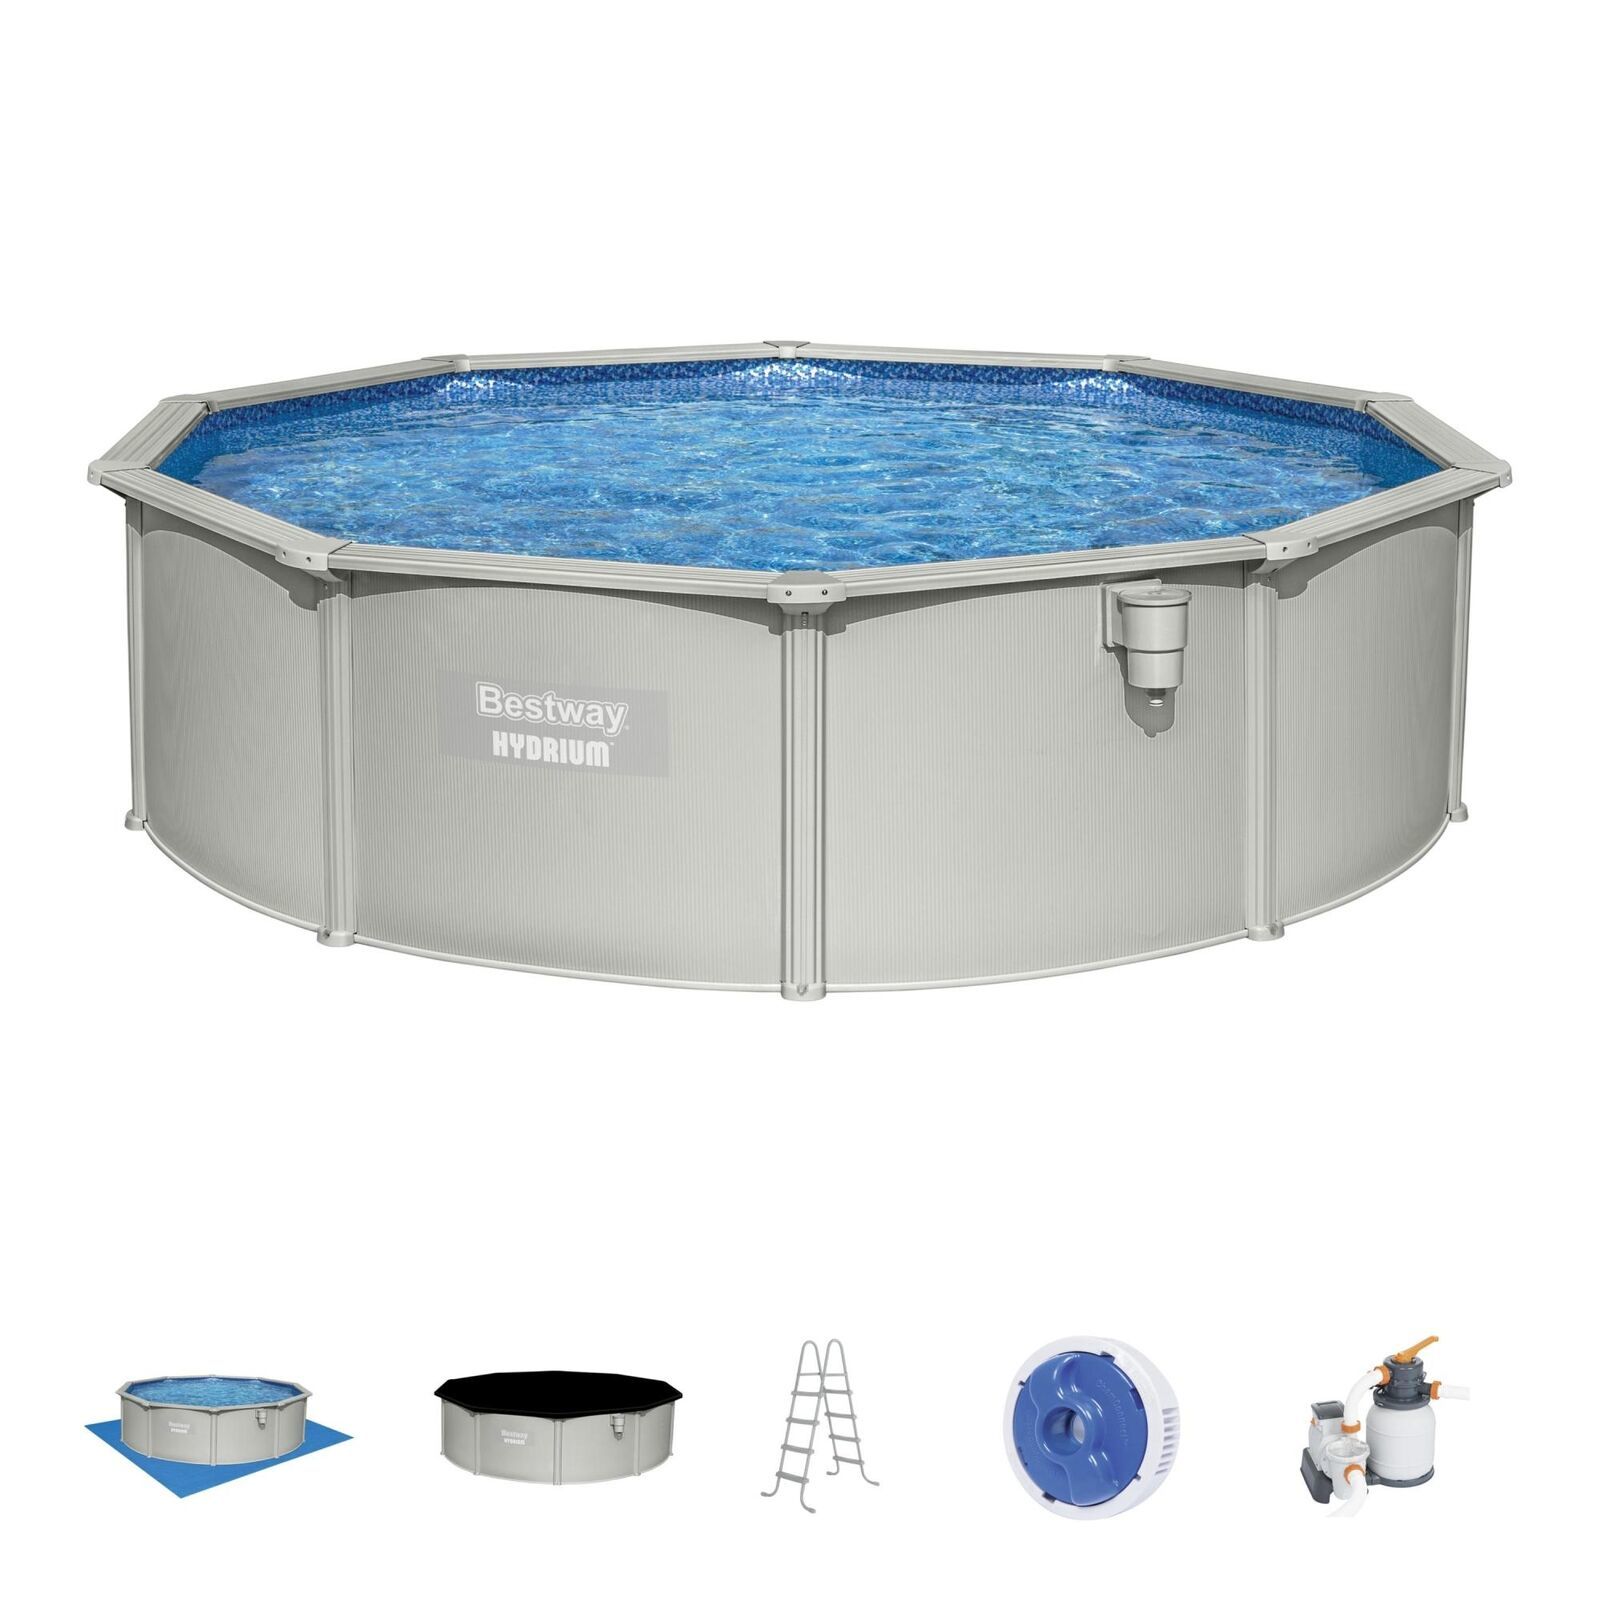 Primary image for Bestway Hydrium 15' x 48" Round Steel Wall Above Ground Swimming Pool Set, Gray